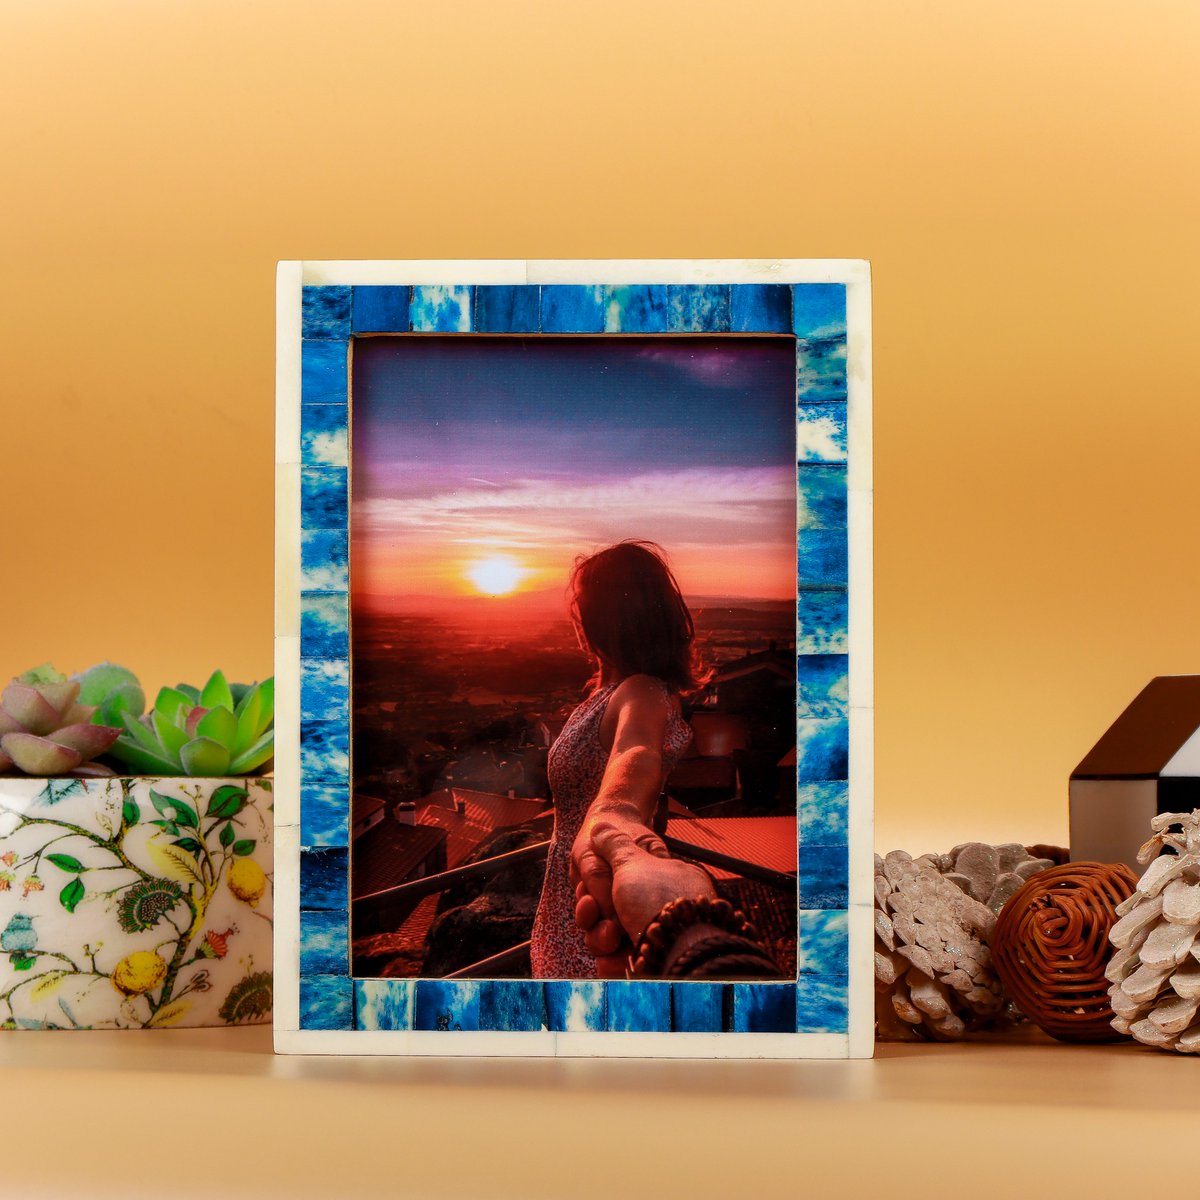 Make favorite memories last a lifetime to any wall in your home with our unique global array of picture-perfect photo frames.
.
.
#handmade #handcrafted #pictureframes #photoframes #boneinlay #trendy #handicraftshome #giftable #walldecor